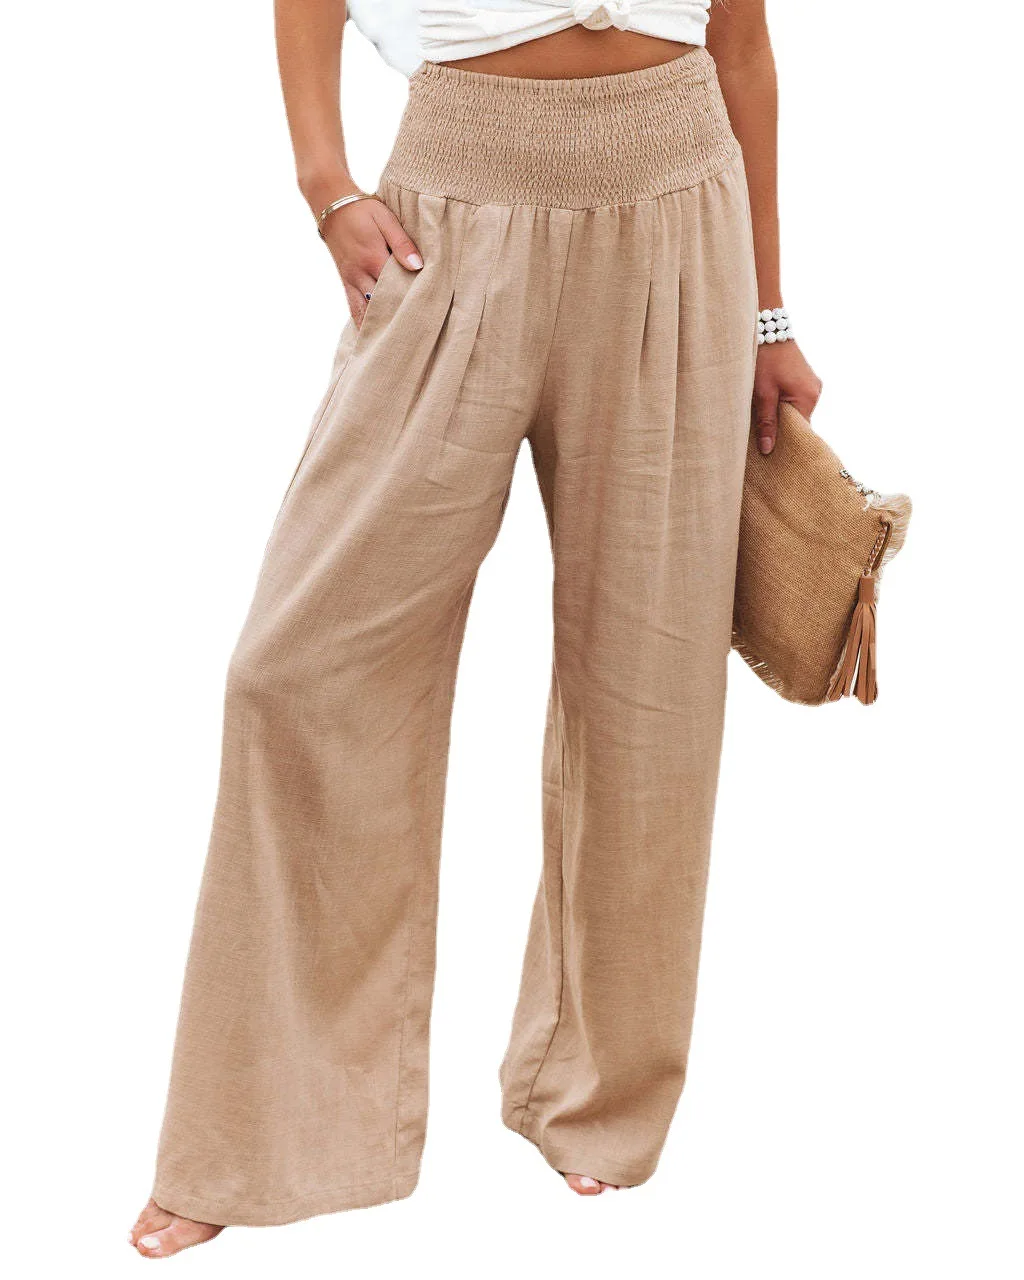 2022 Spring and Summer Women's Fashion Elastic Waist Wide Leg Pants Female & Lady Casual Pant Trousers